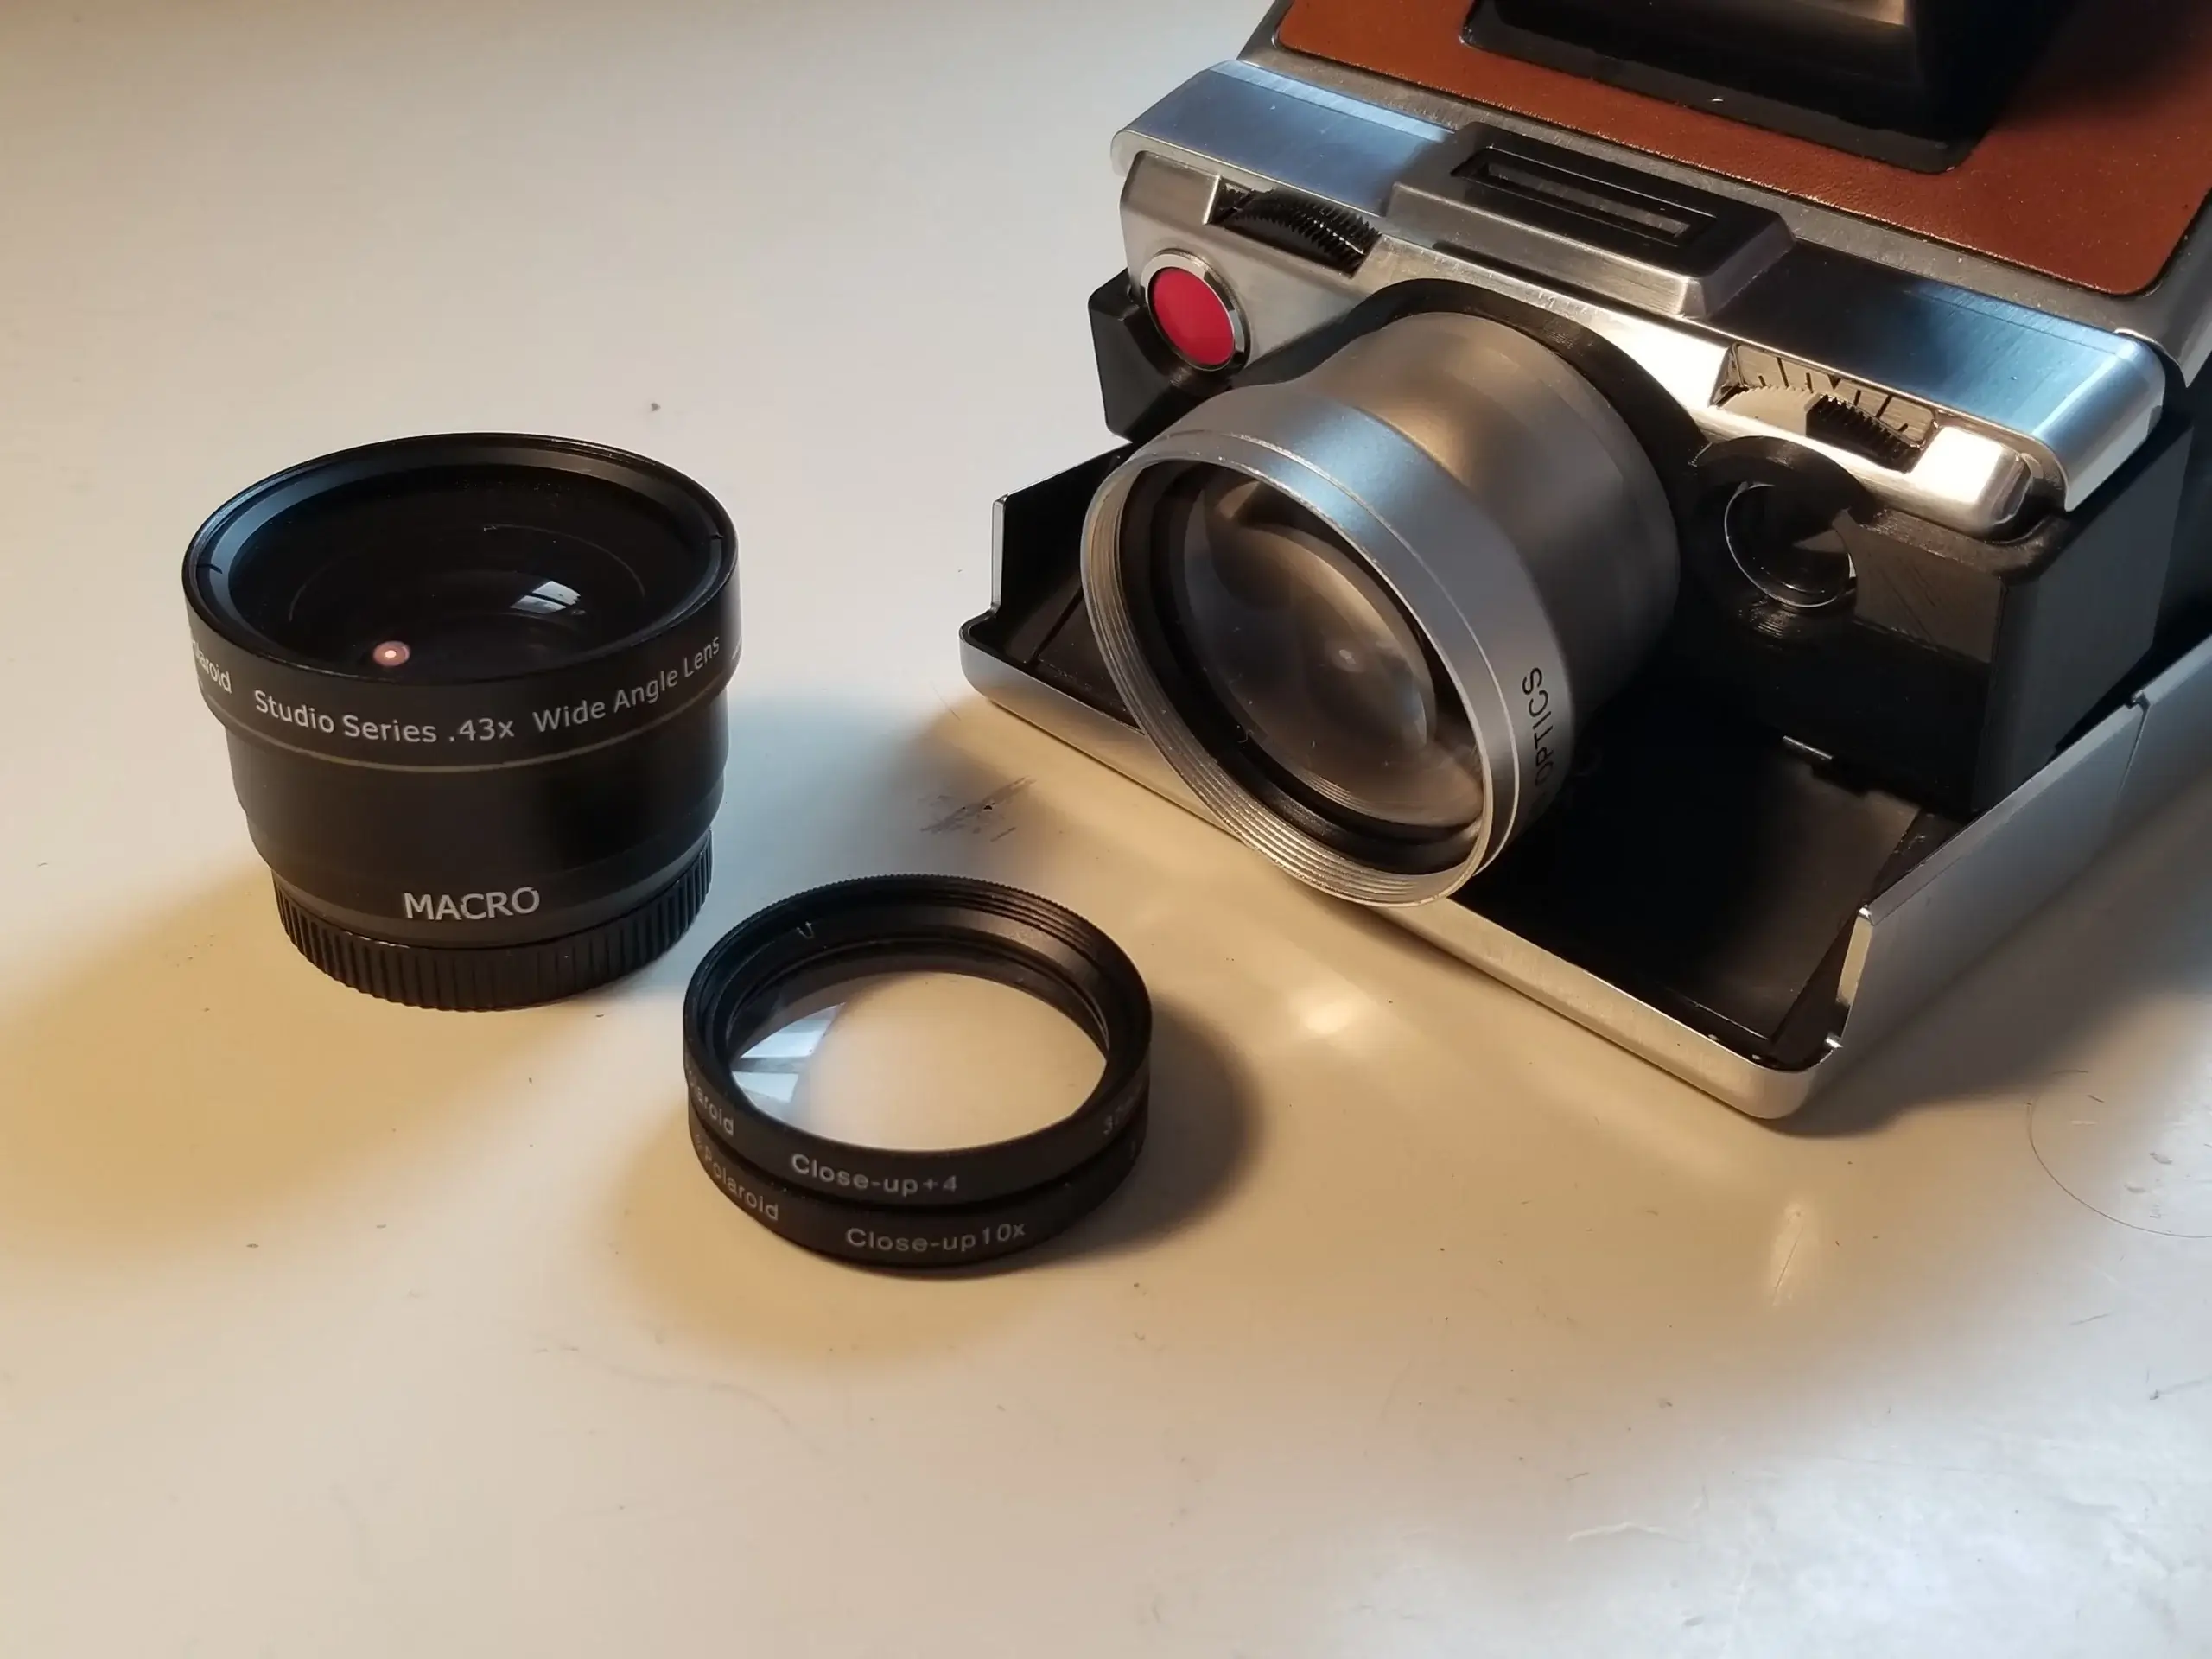 Using the Lens Attachments